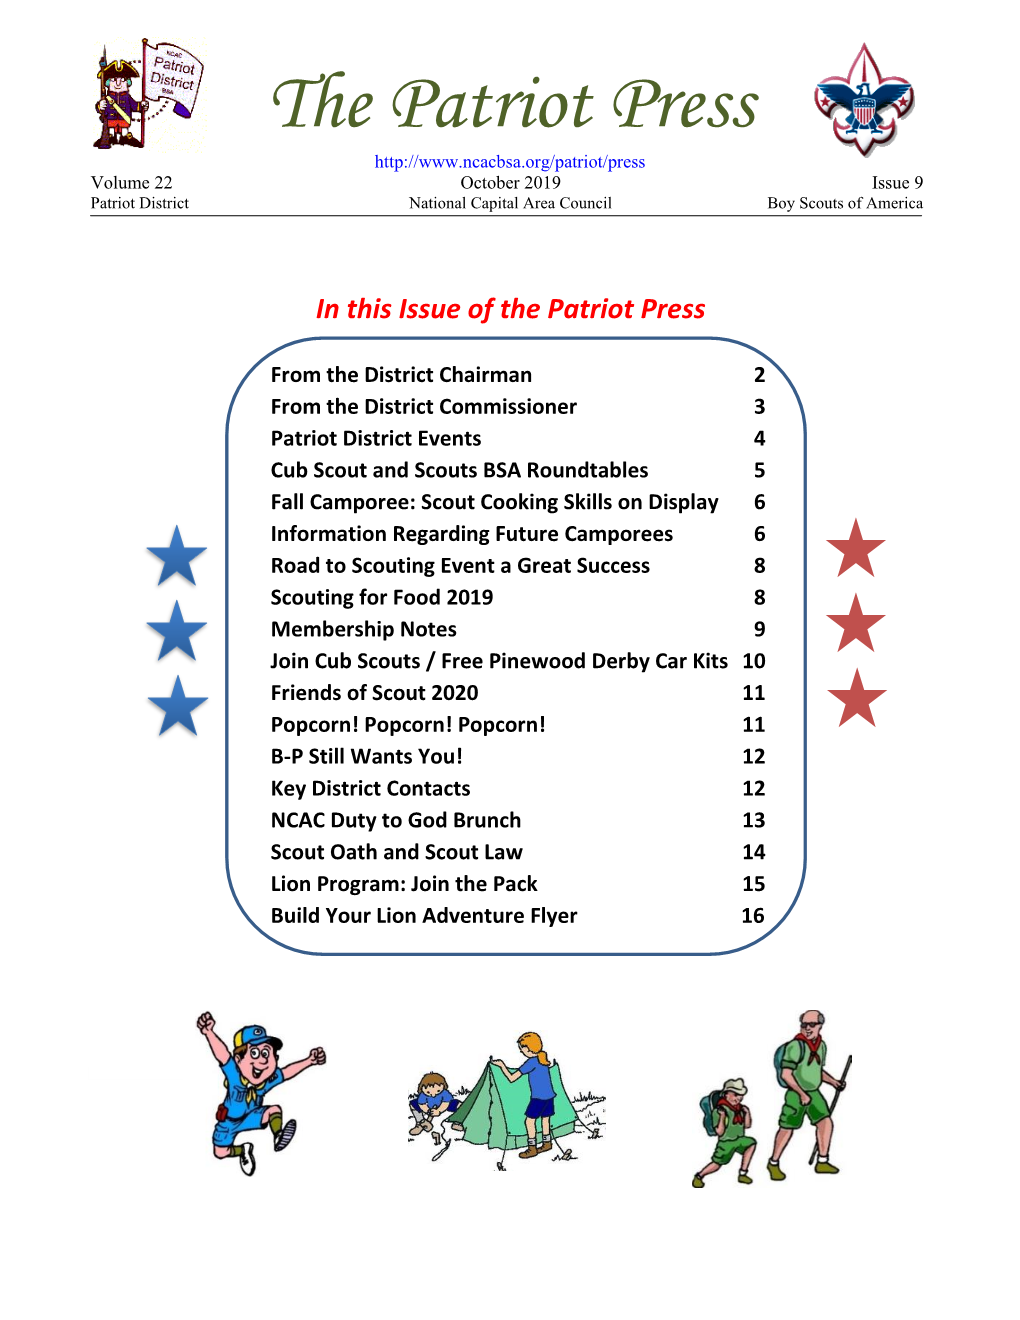 The Patriot Press Volume 22 October 2019 Issue 9 Patriot District National Capital Area Council Boy Scouts of America